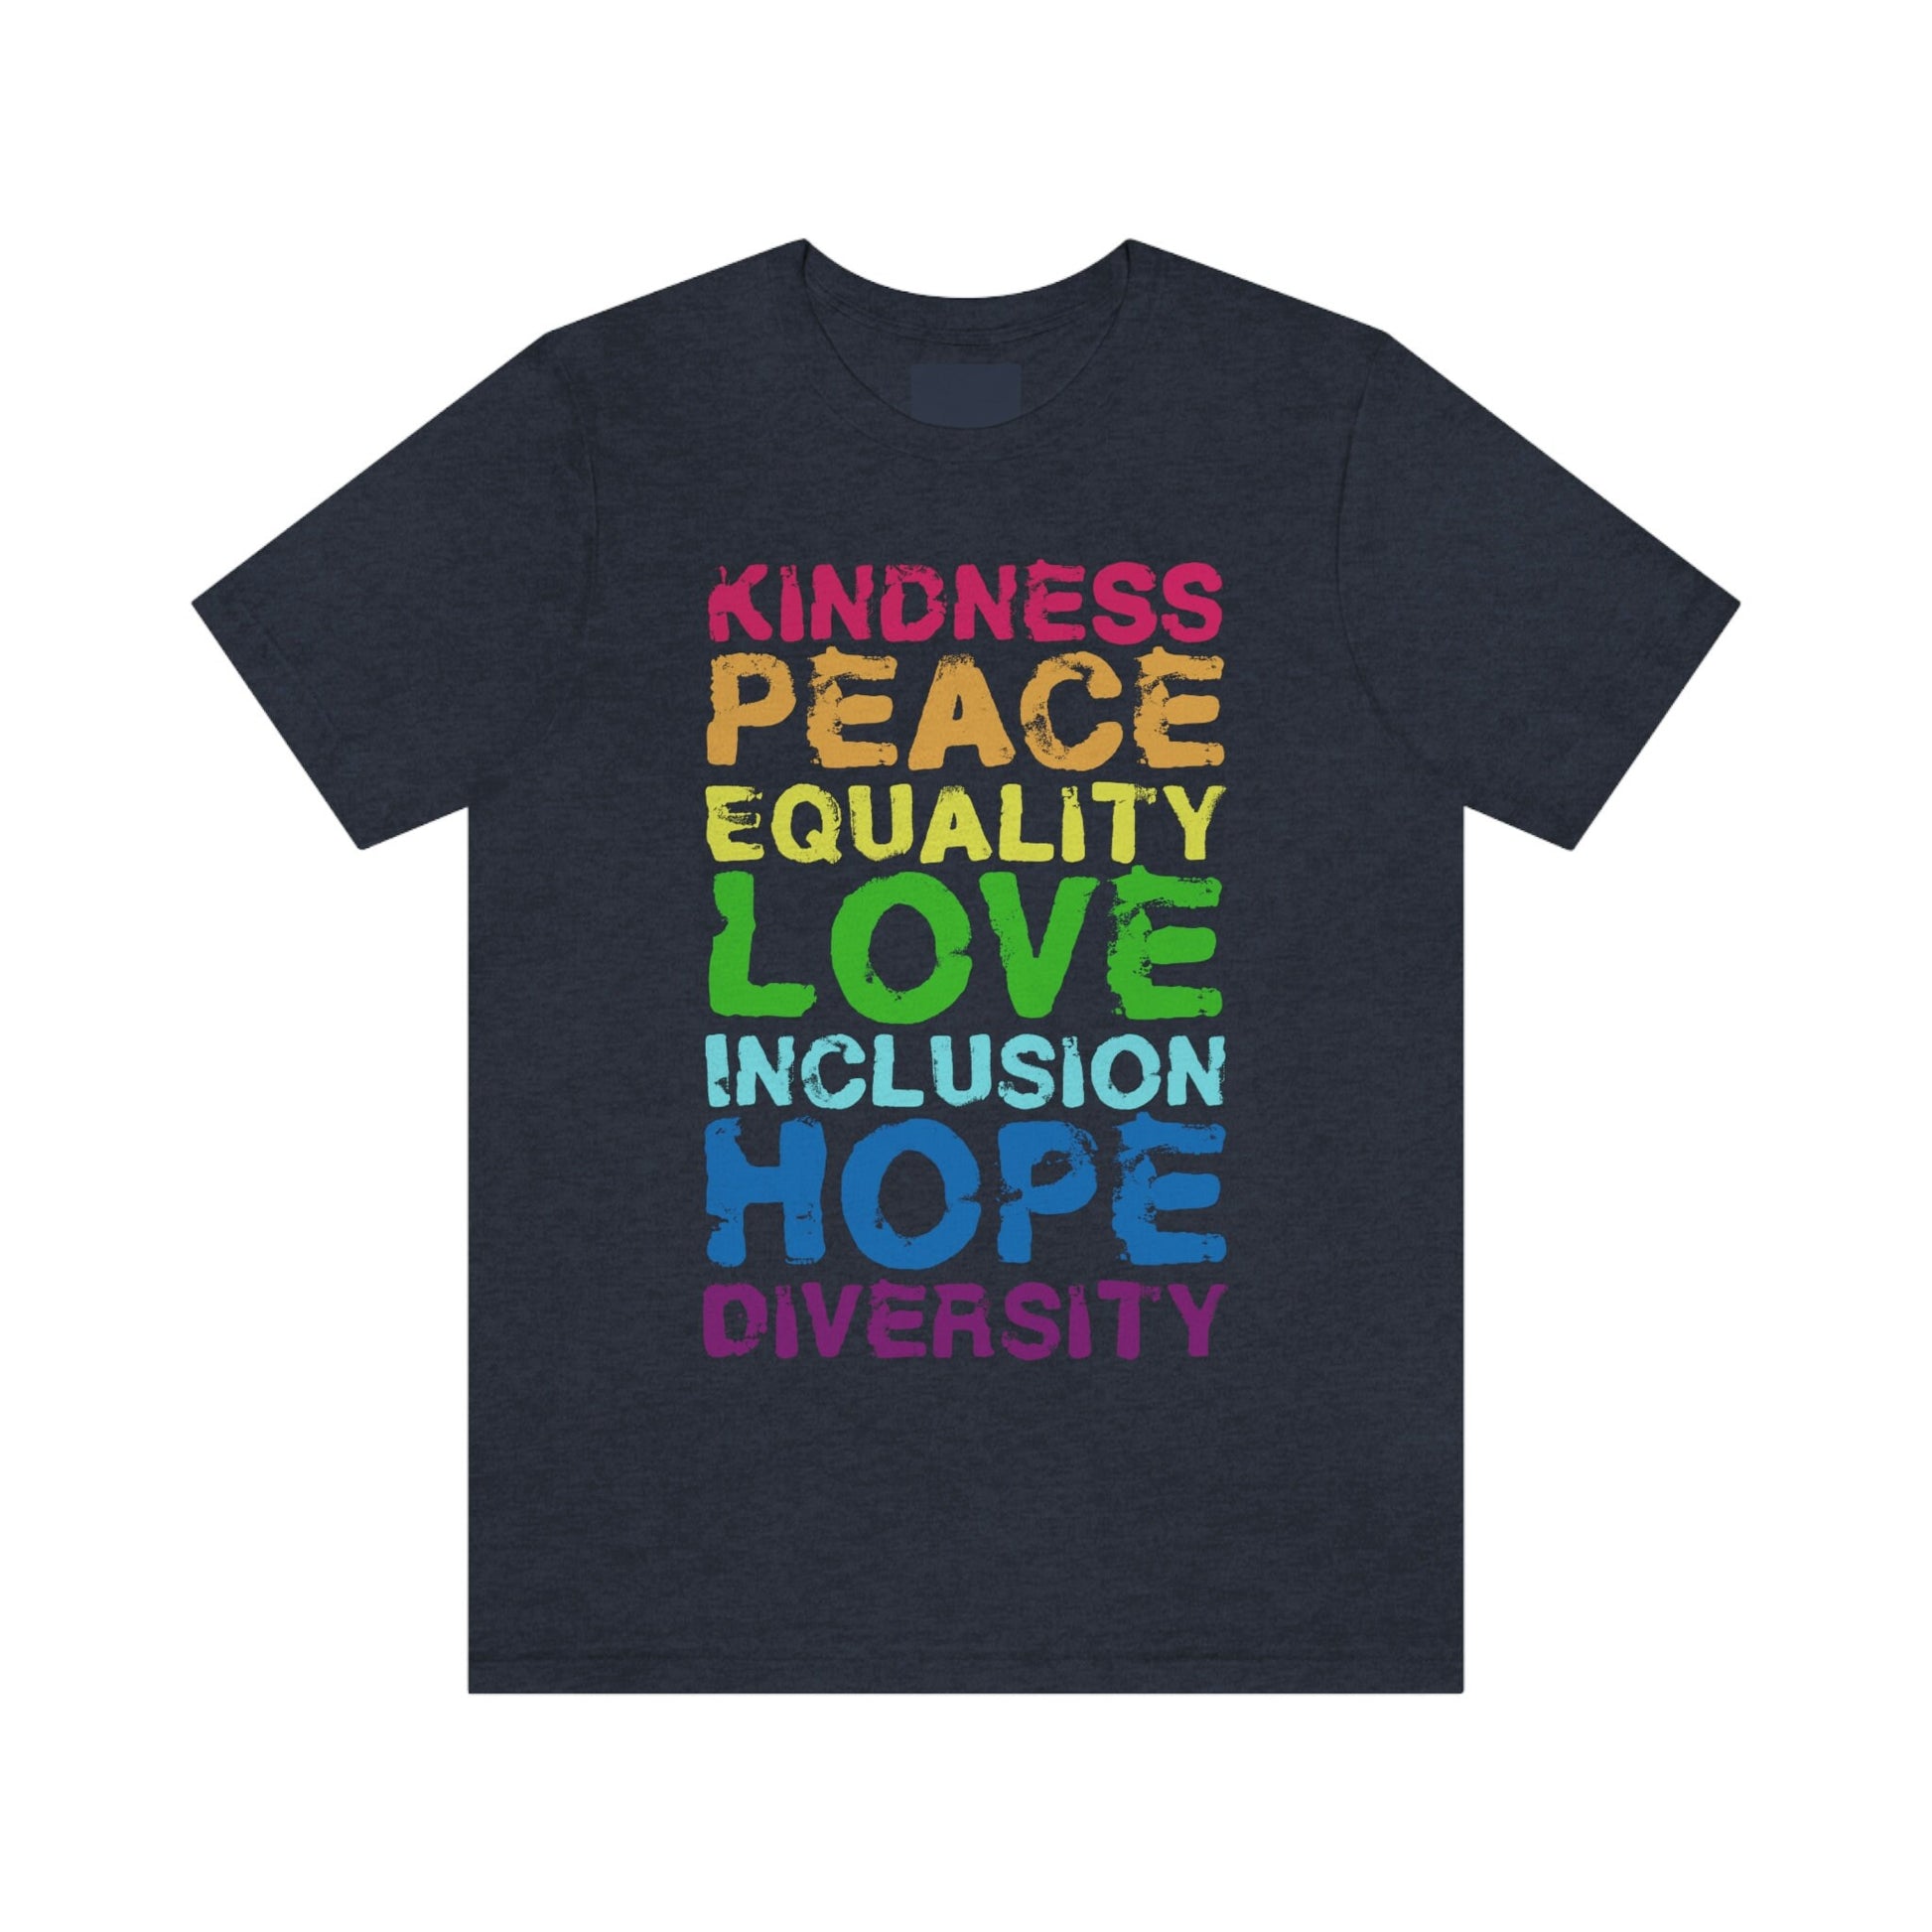 Peace Love Inclusion Equality Diversity Human Rights T-Shirt Gift - 37 Design Unit